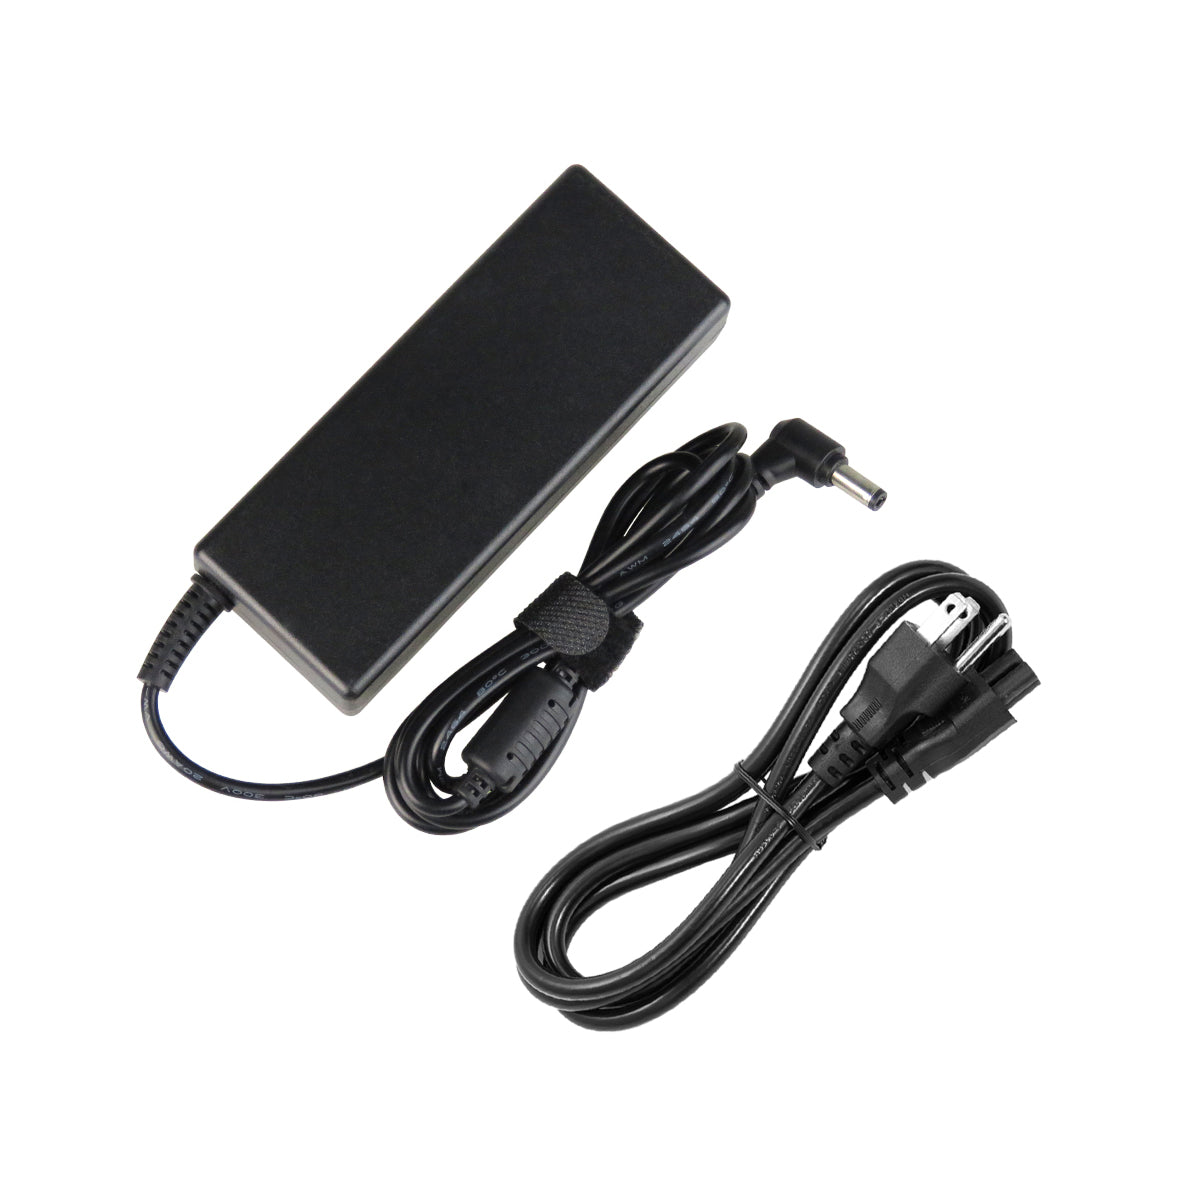 AC Adapter Charger for ASUS P53SJ Notebook.